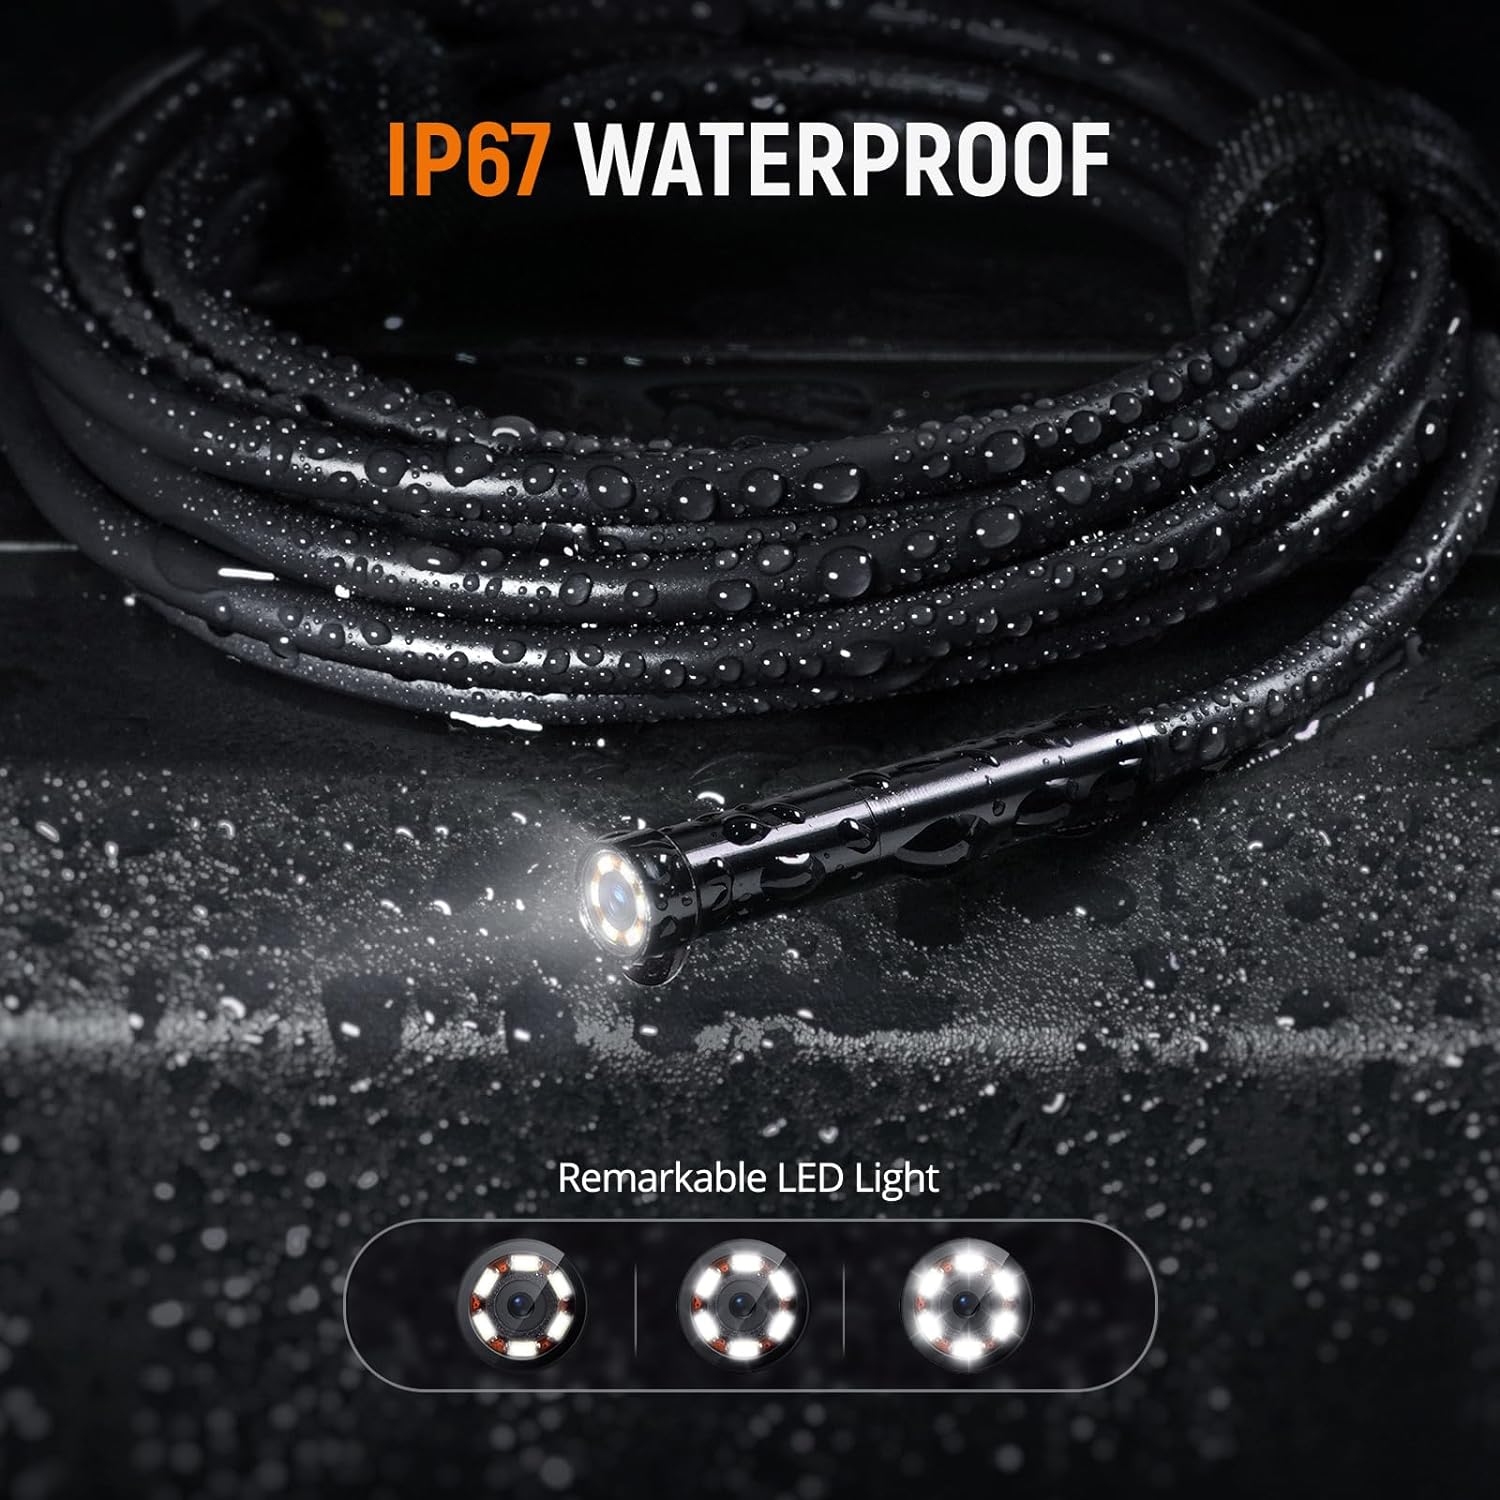 Borescope Inspection Camera with 4.3 Inch IPS Screen, 1080P Snake Camera for Sewer